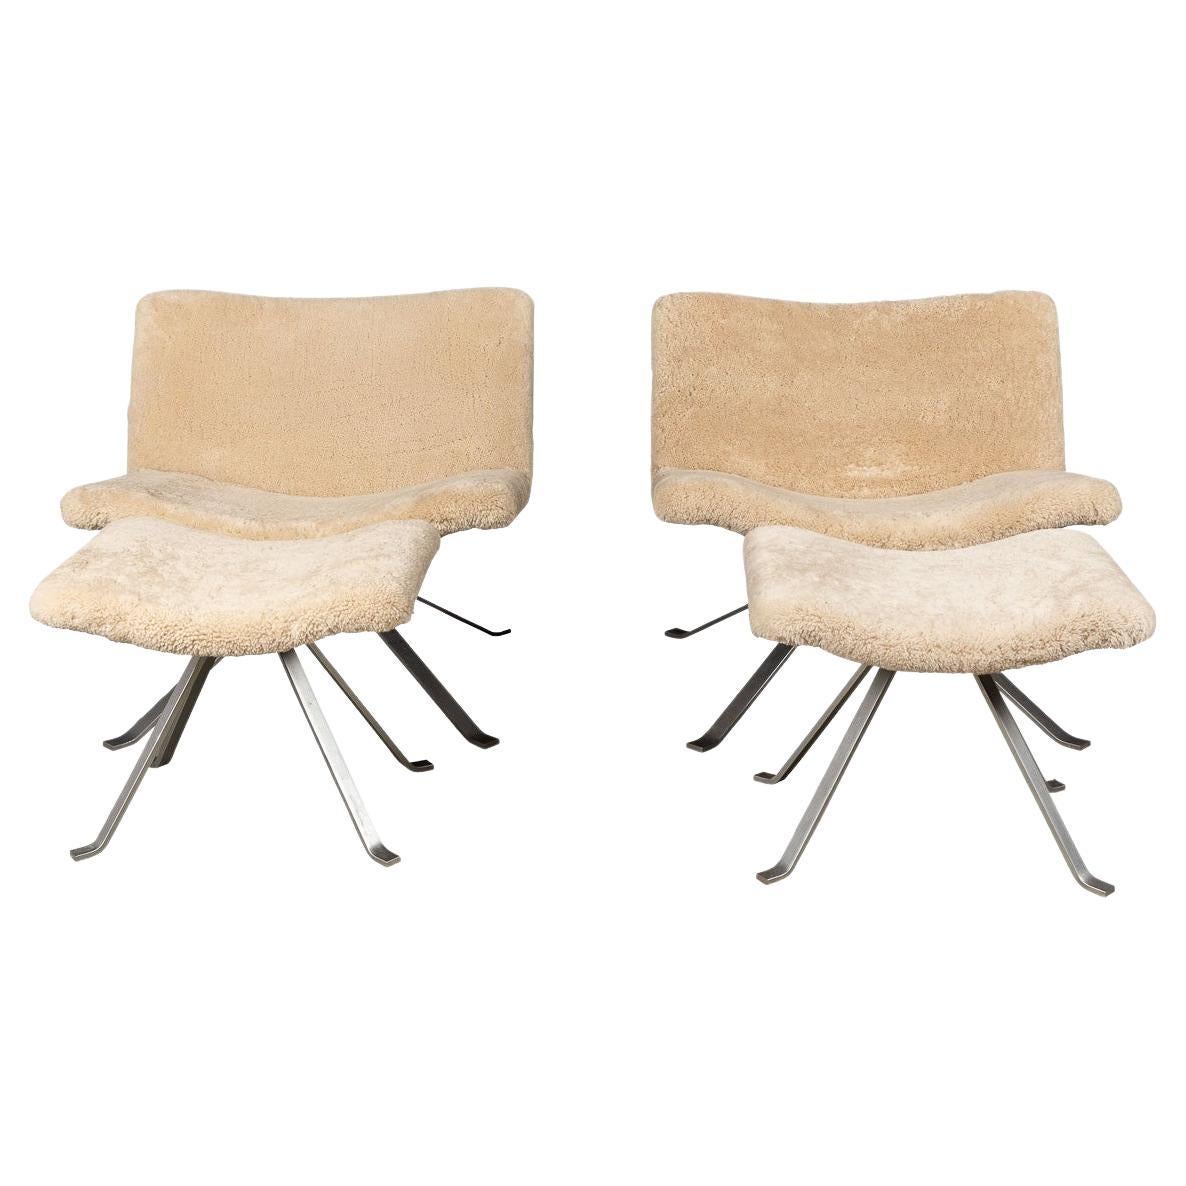 20th Century Italian Swivel Chairs with Matching Foot Stools, circa 1970 For Sale